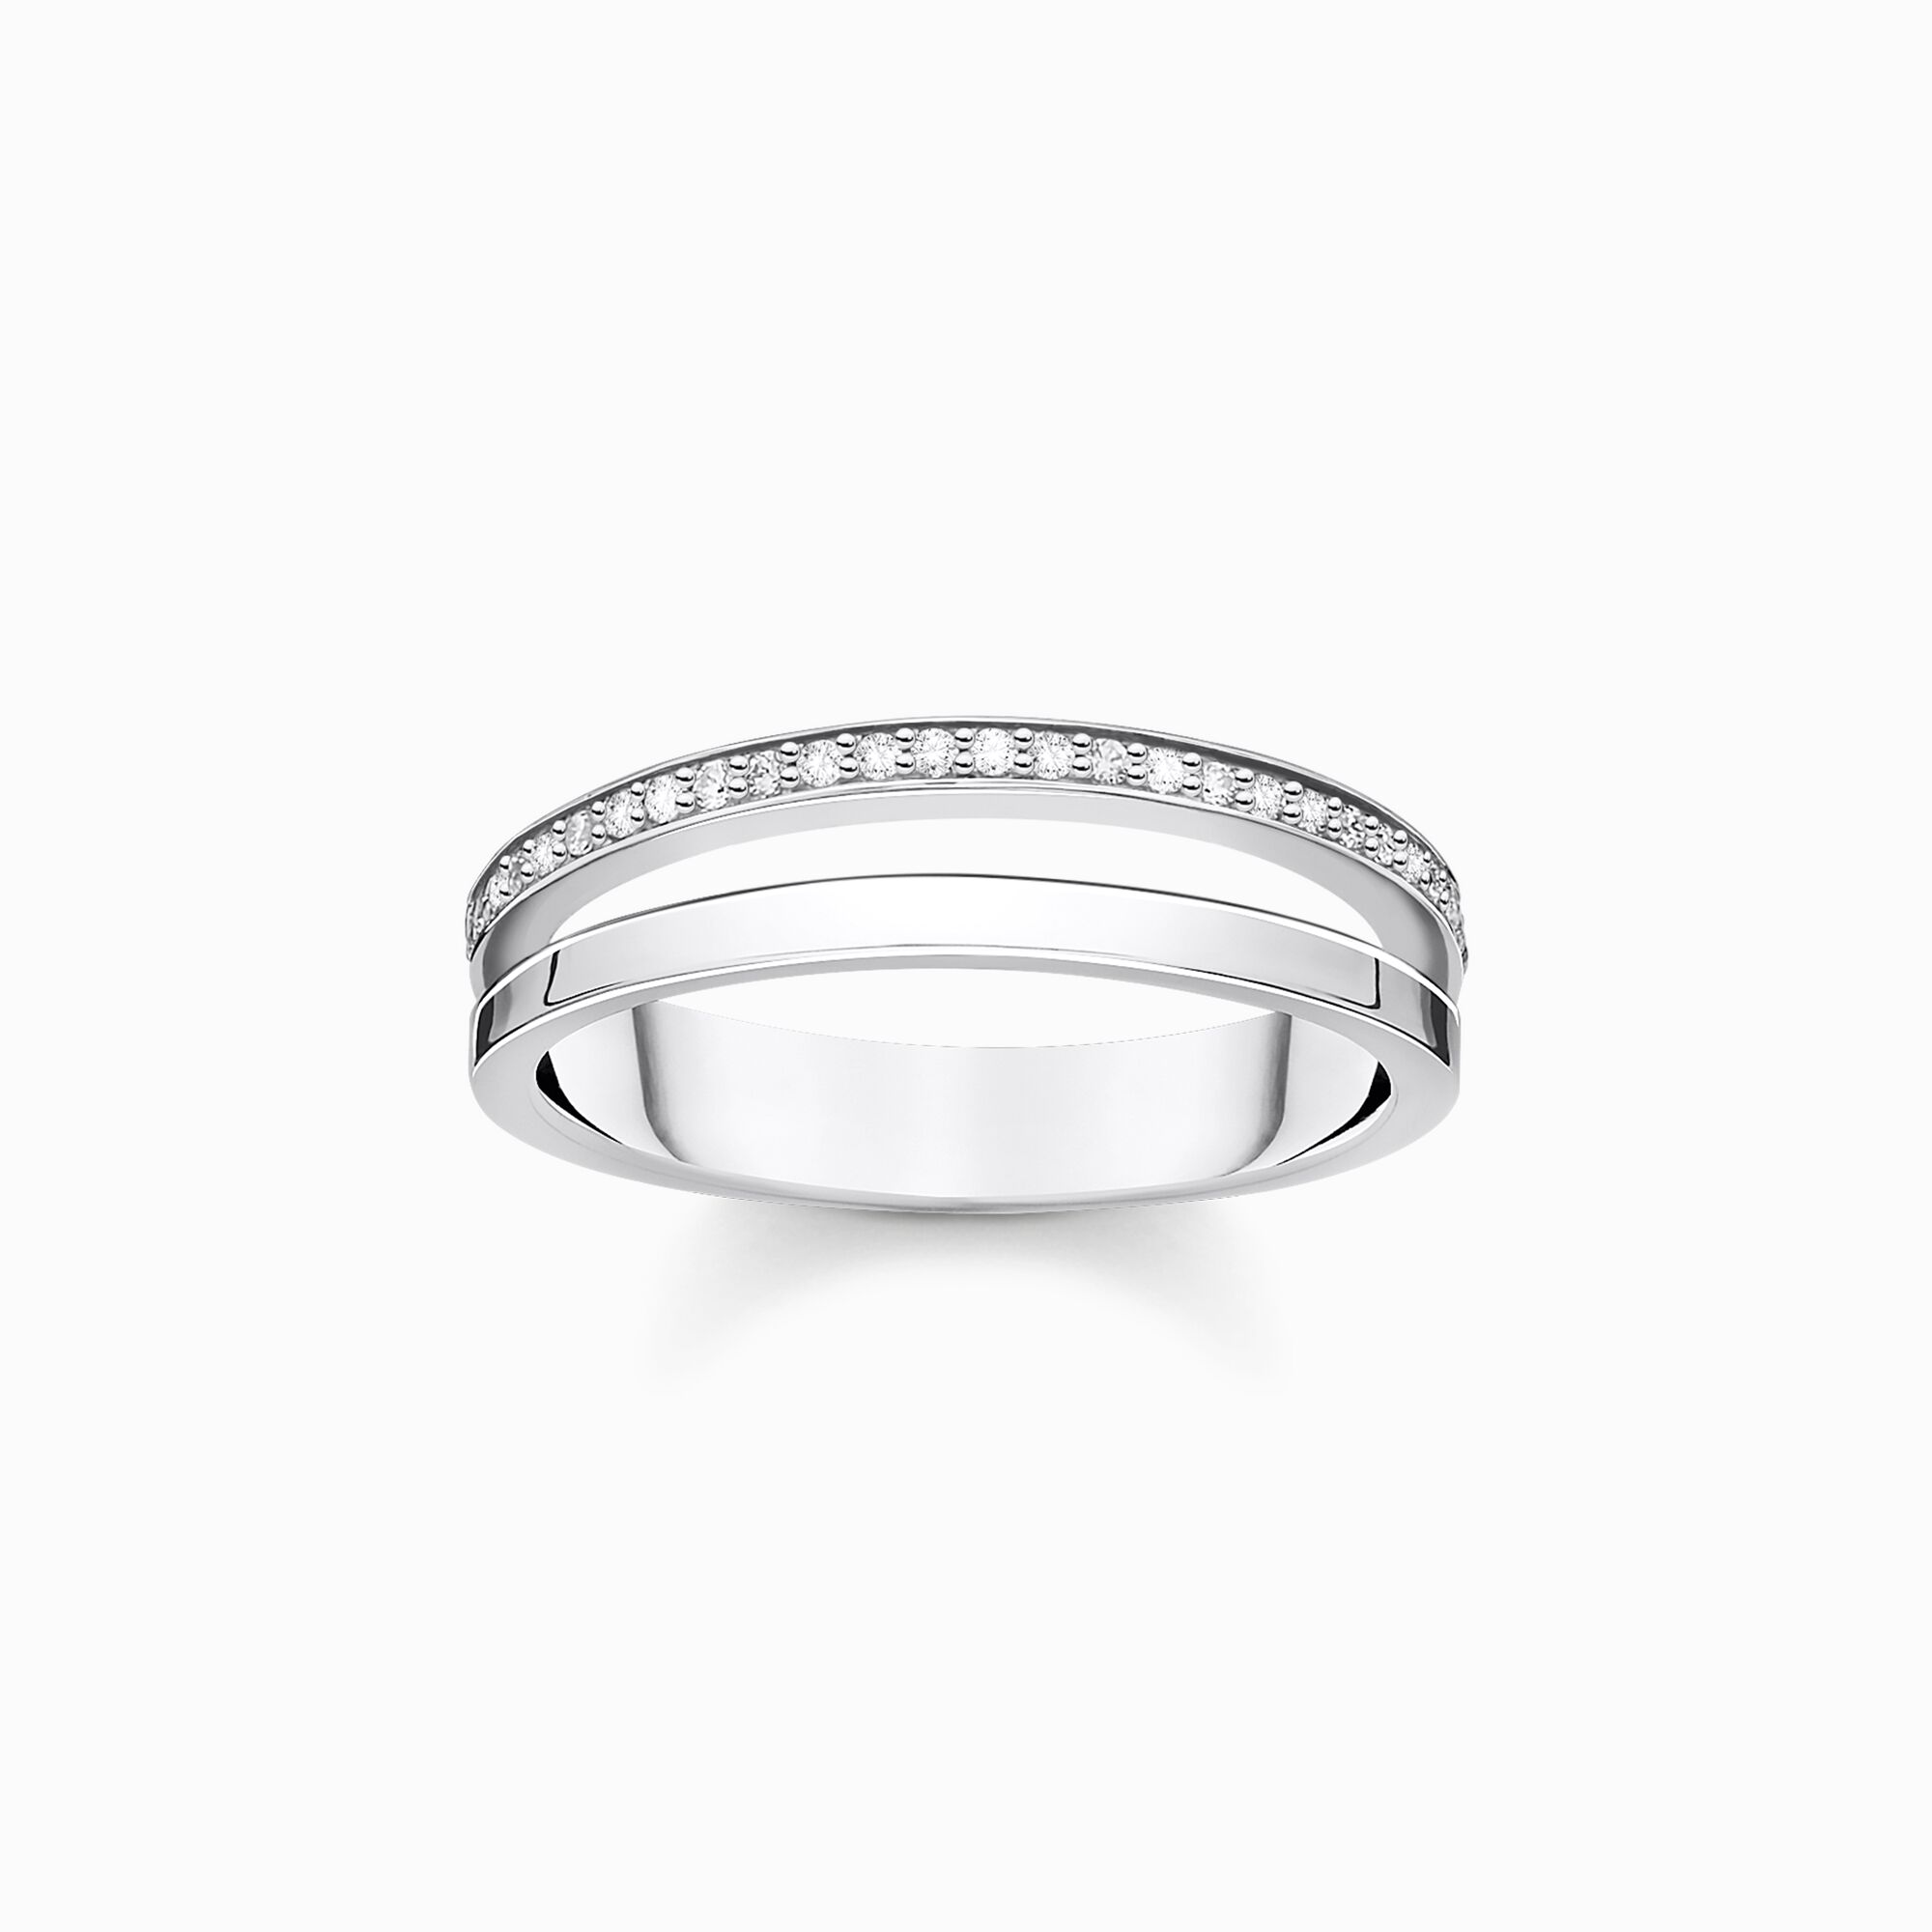 Ring double white stones silver from the Charming Collection collection in the THOMAS SABO online store